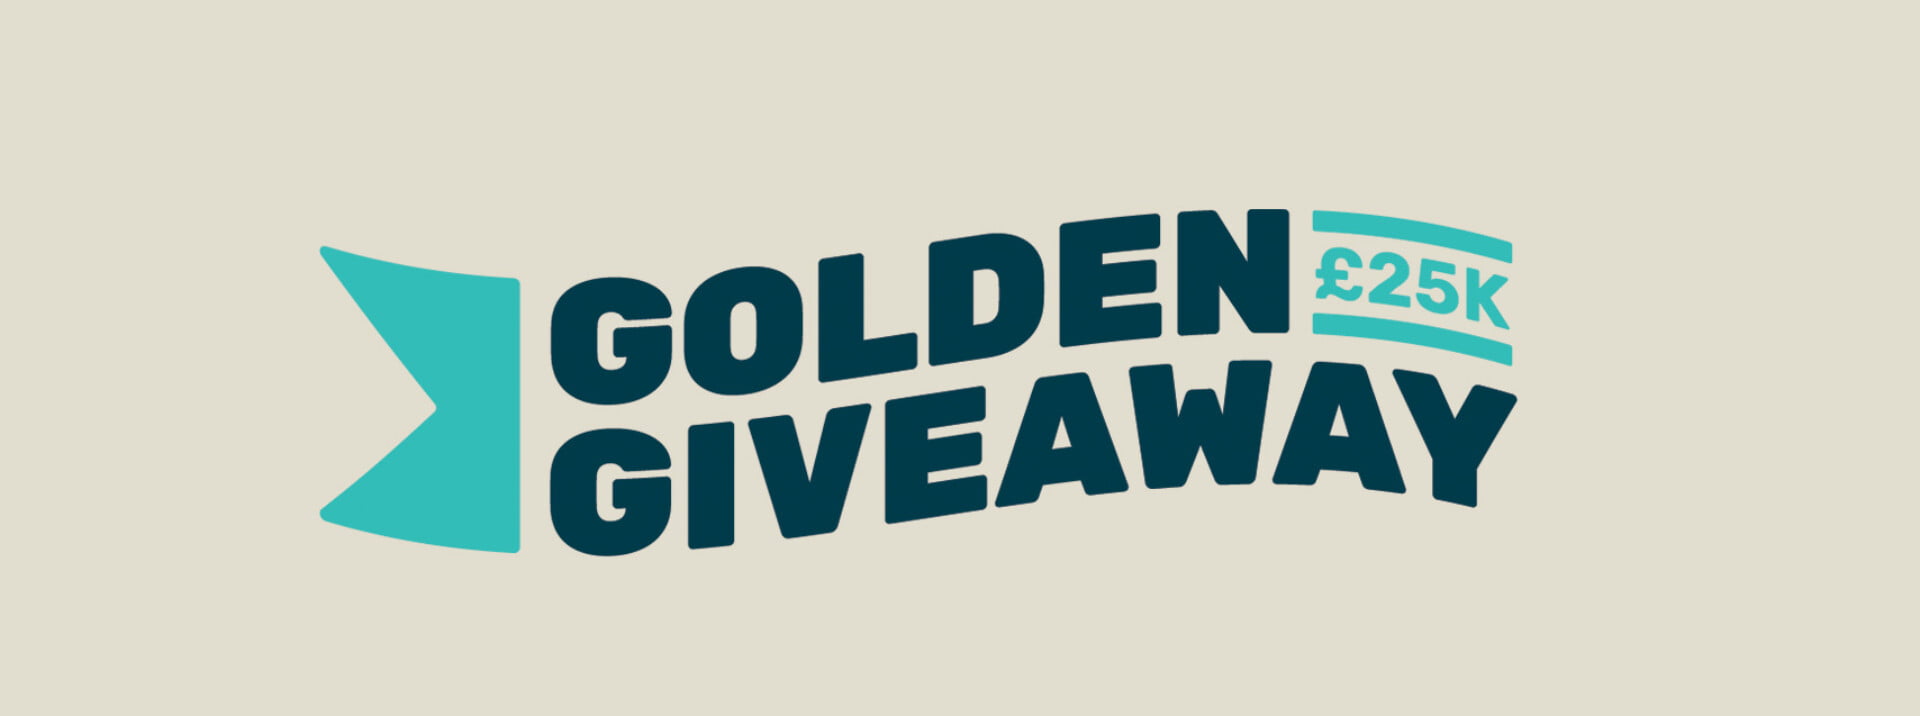 Our Golden Giveaway is back! 